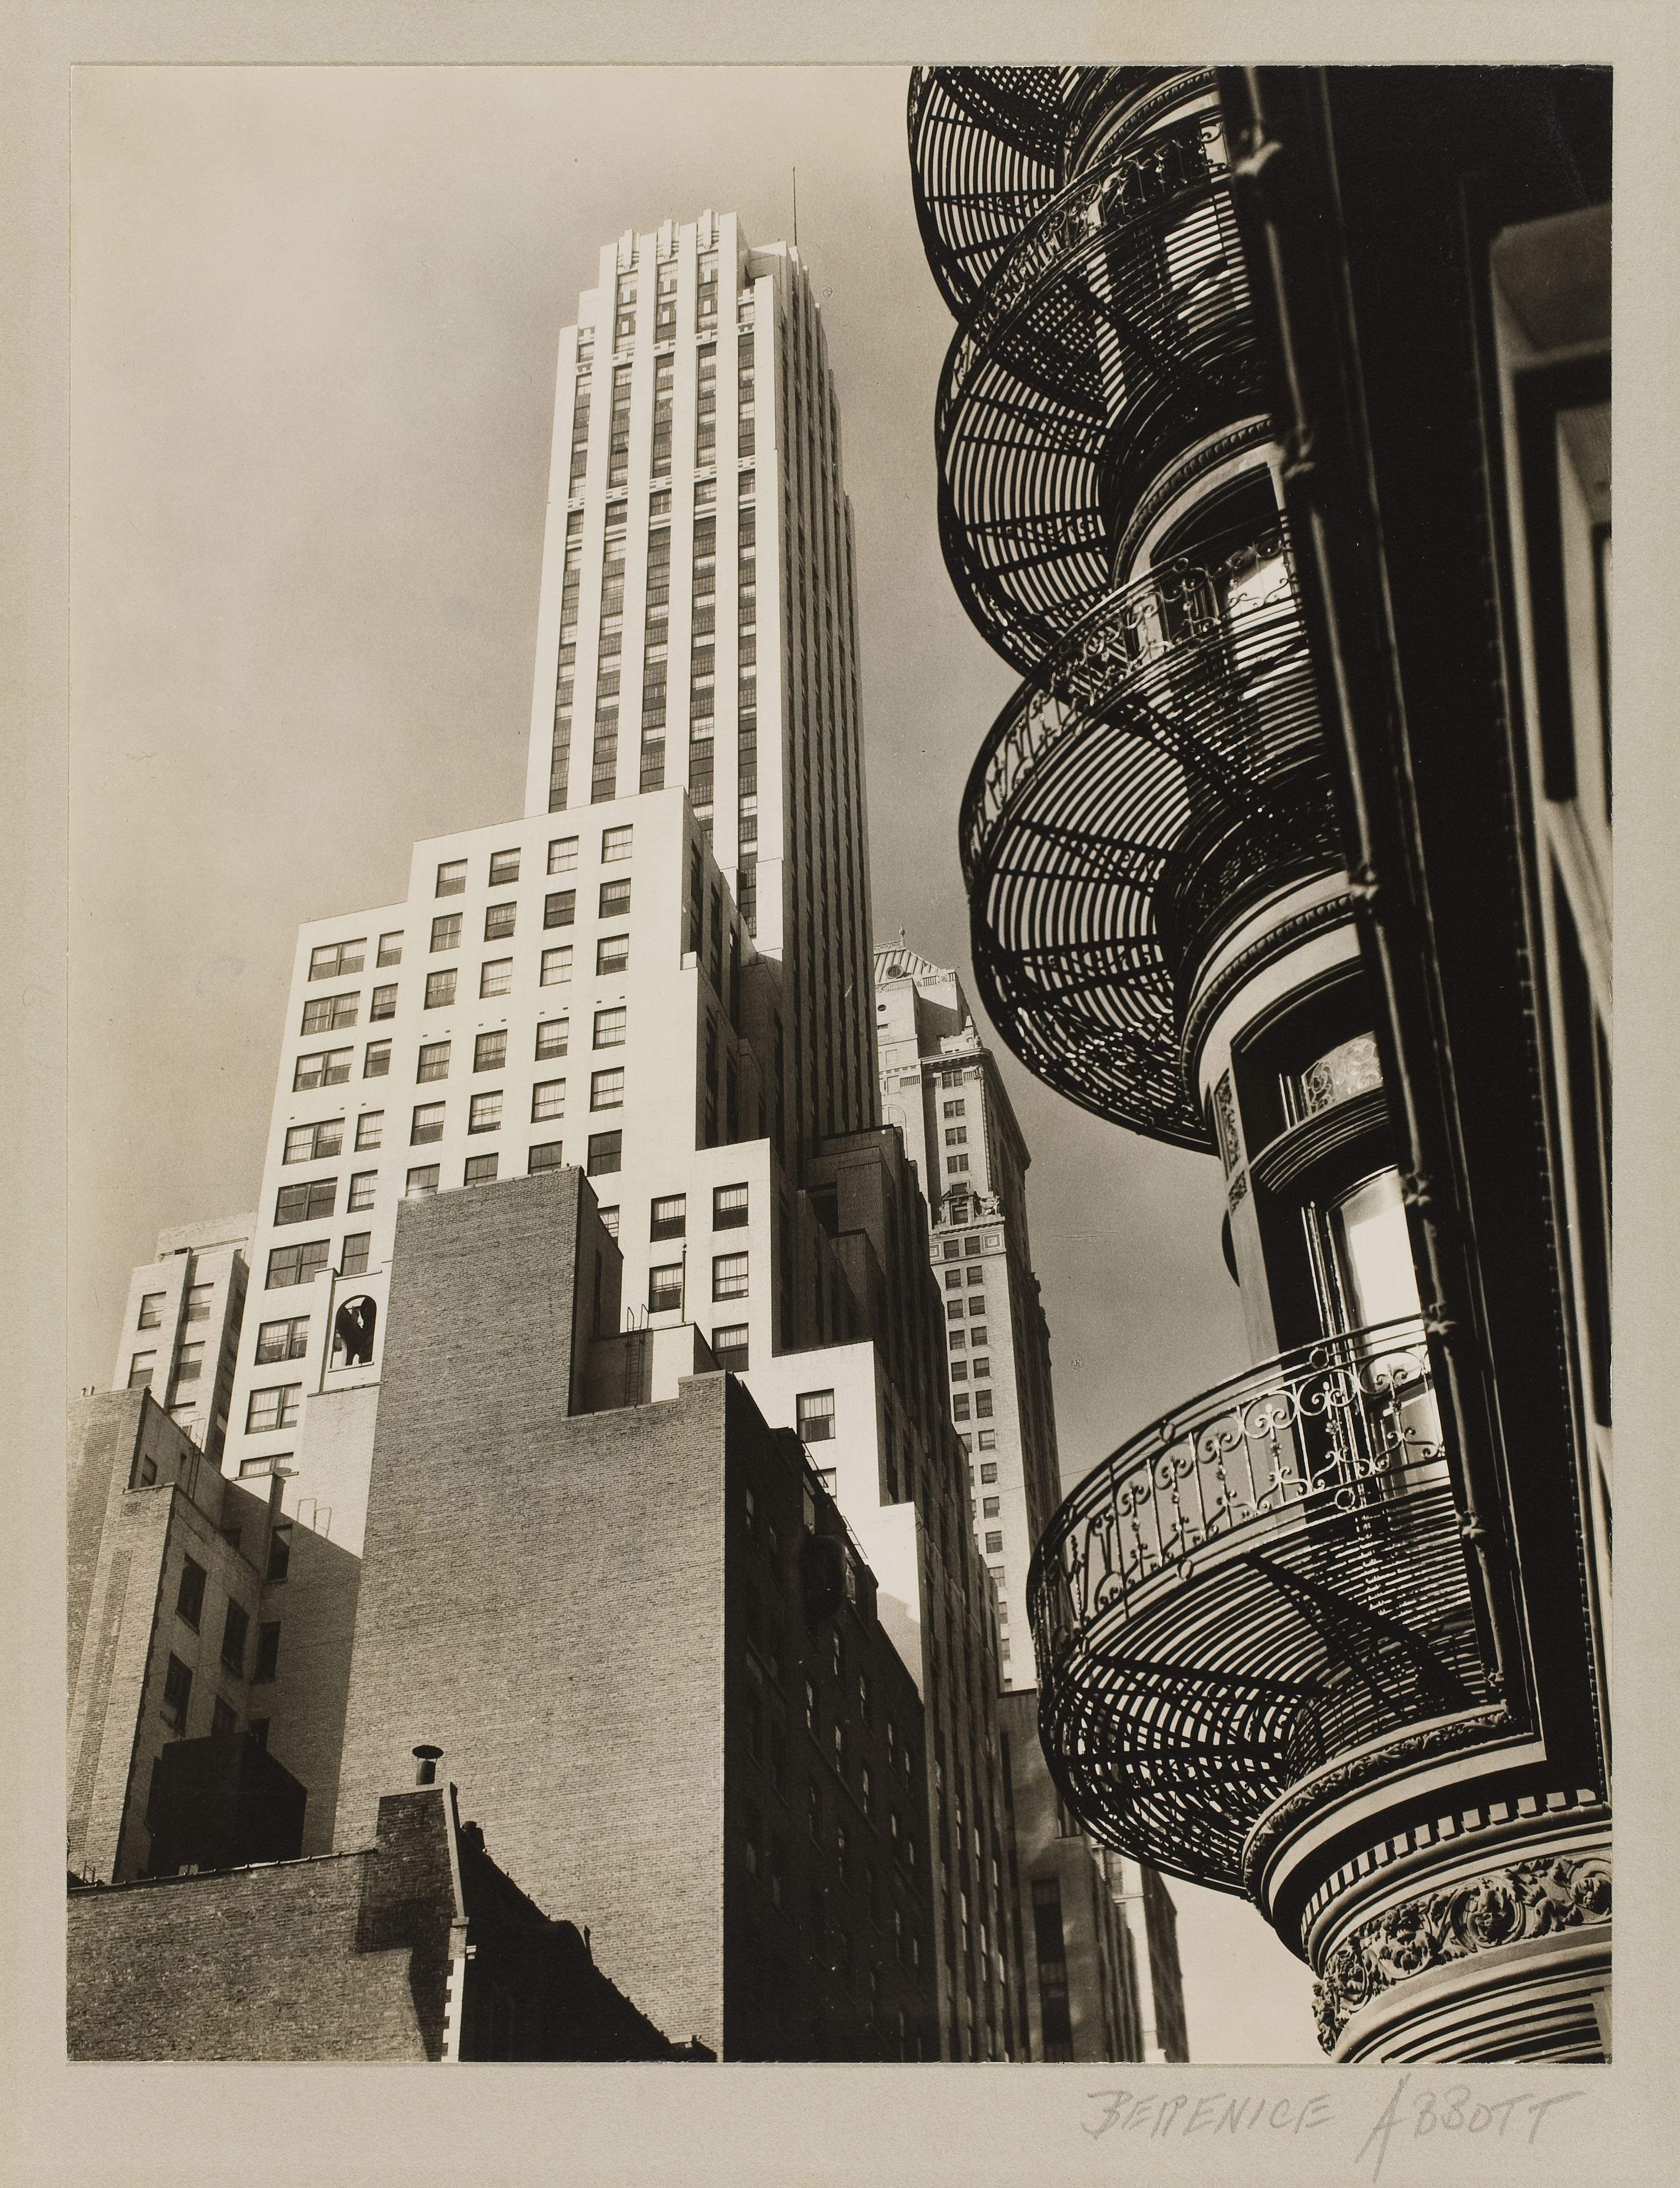 old photograph of skyscraper and metal building accents